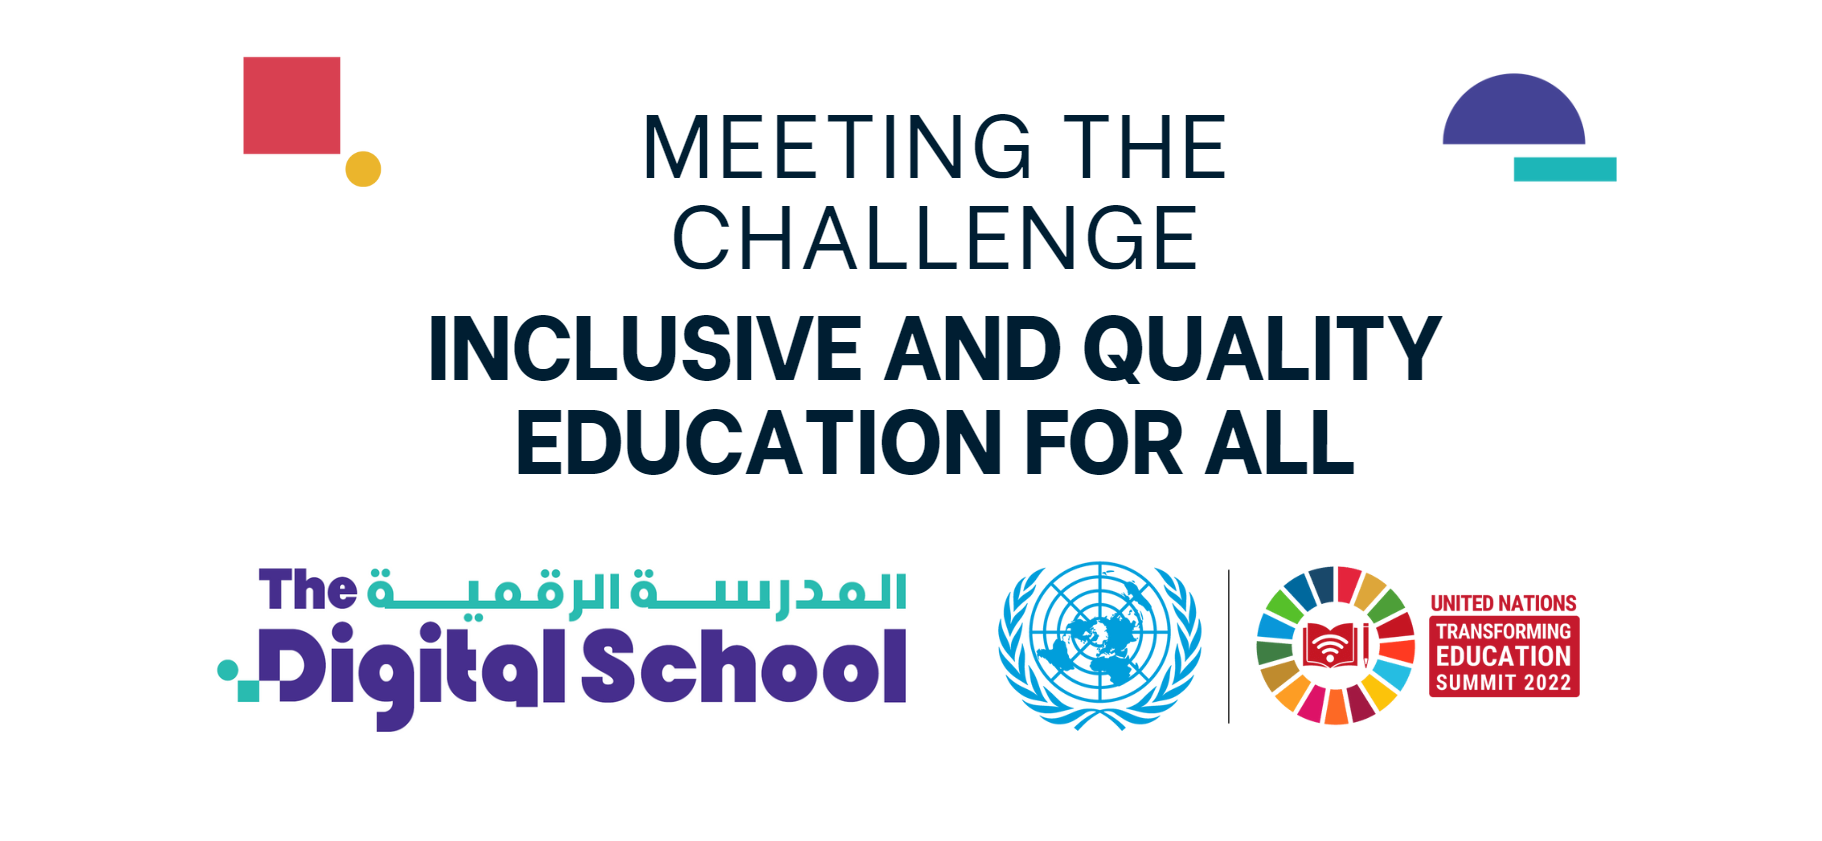 Meeting the challenge: Inclusive and Quality Education for All